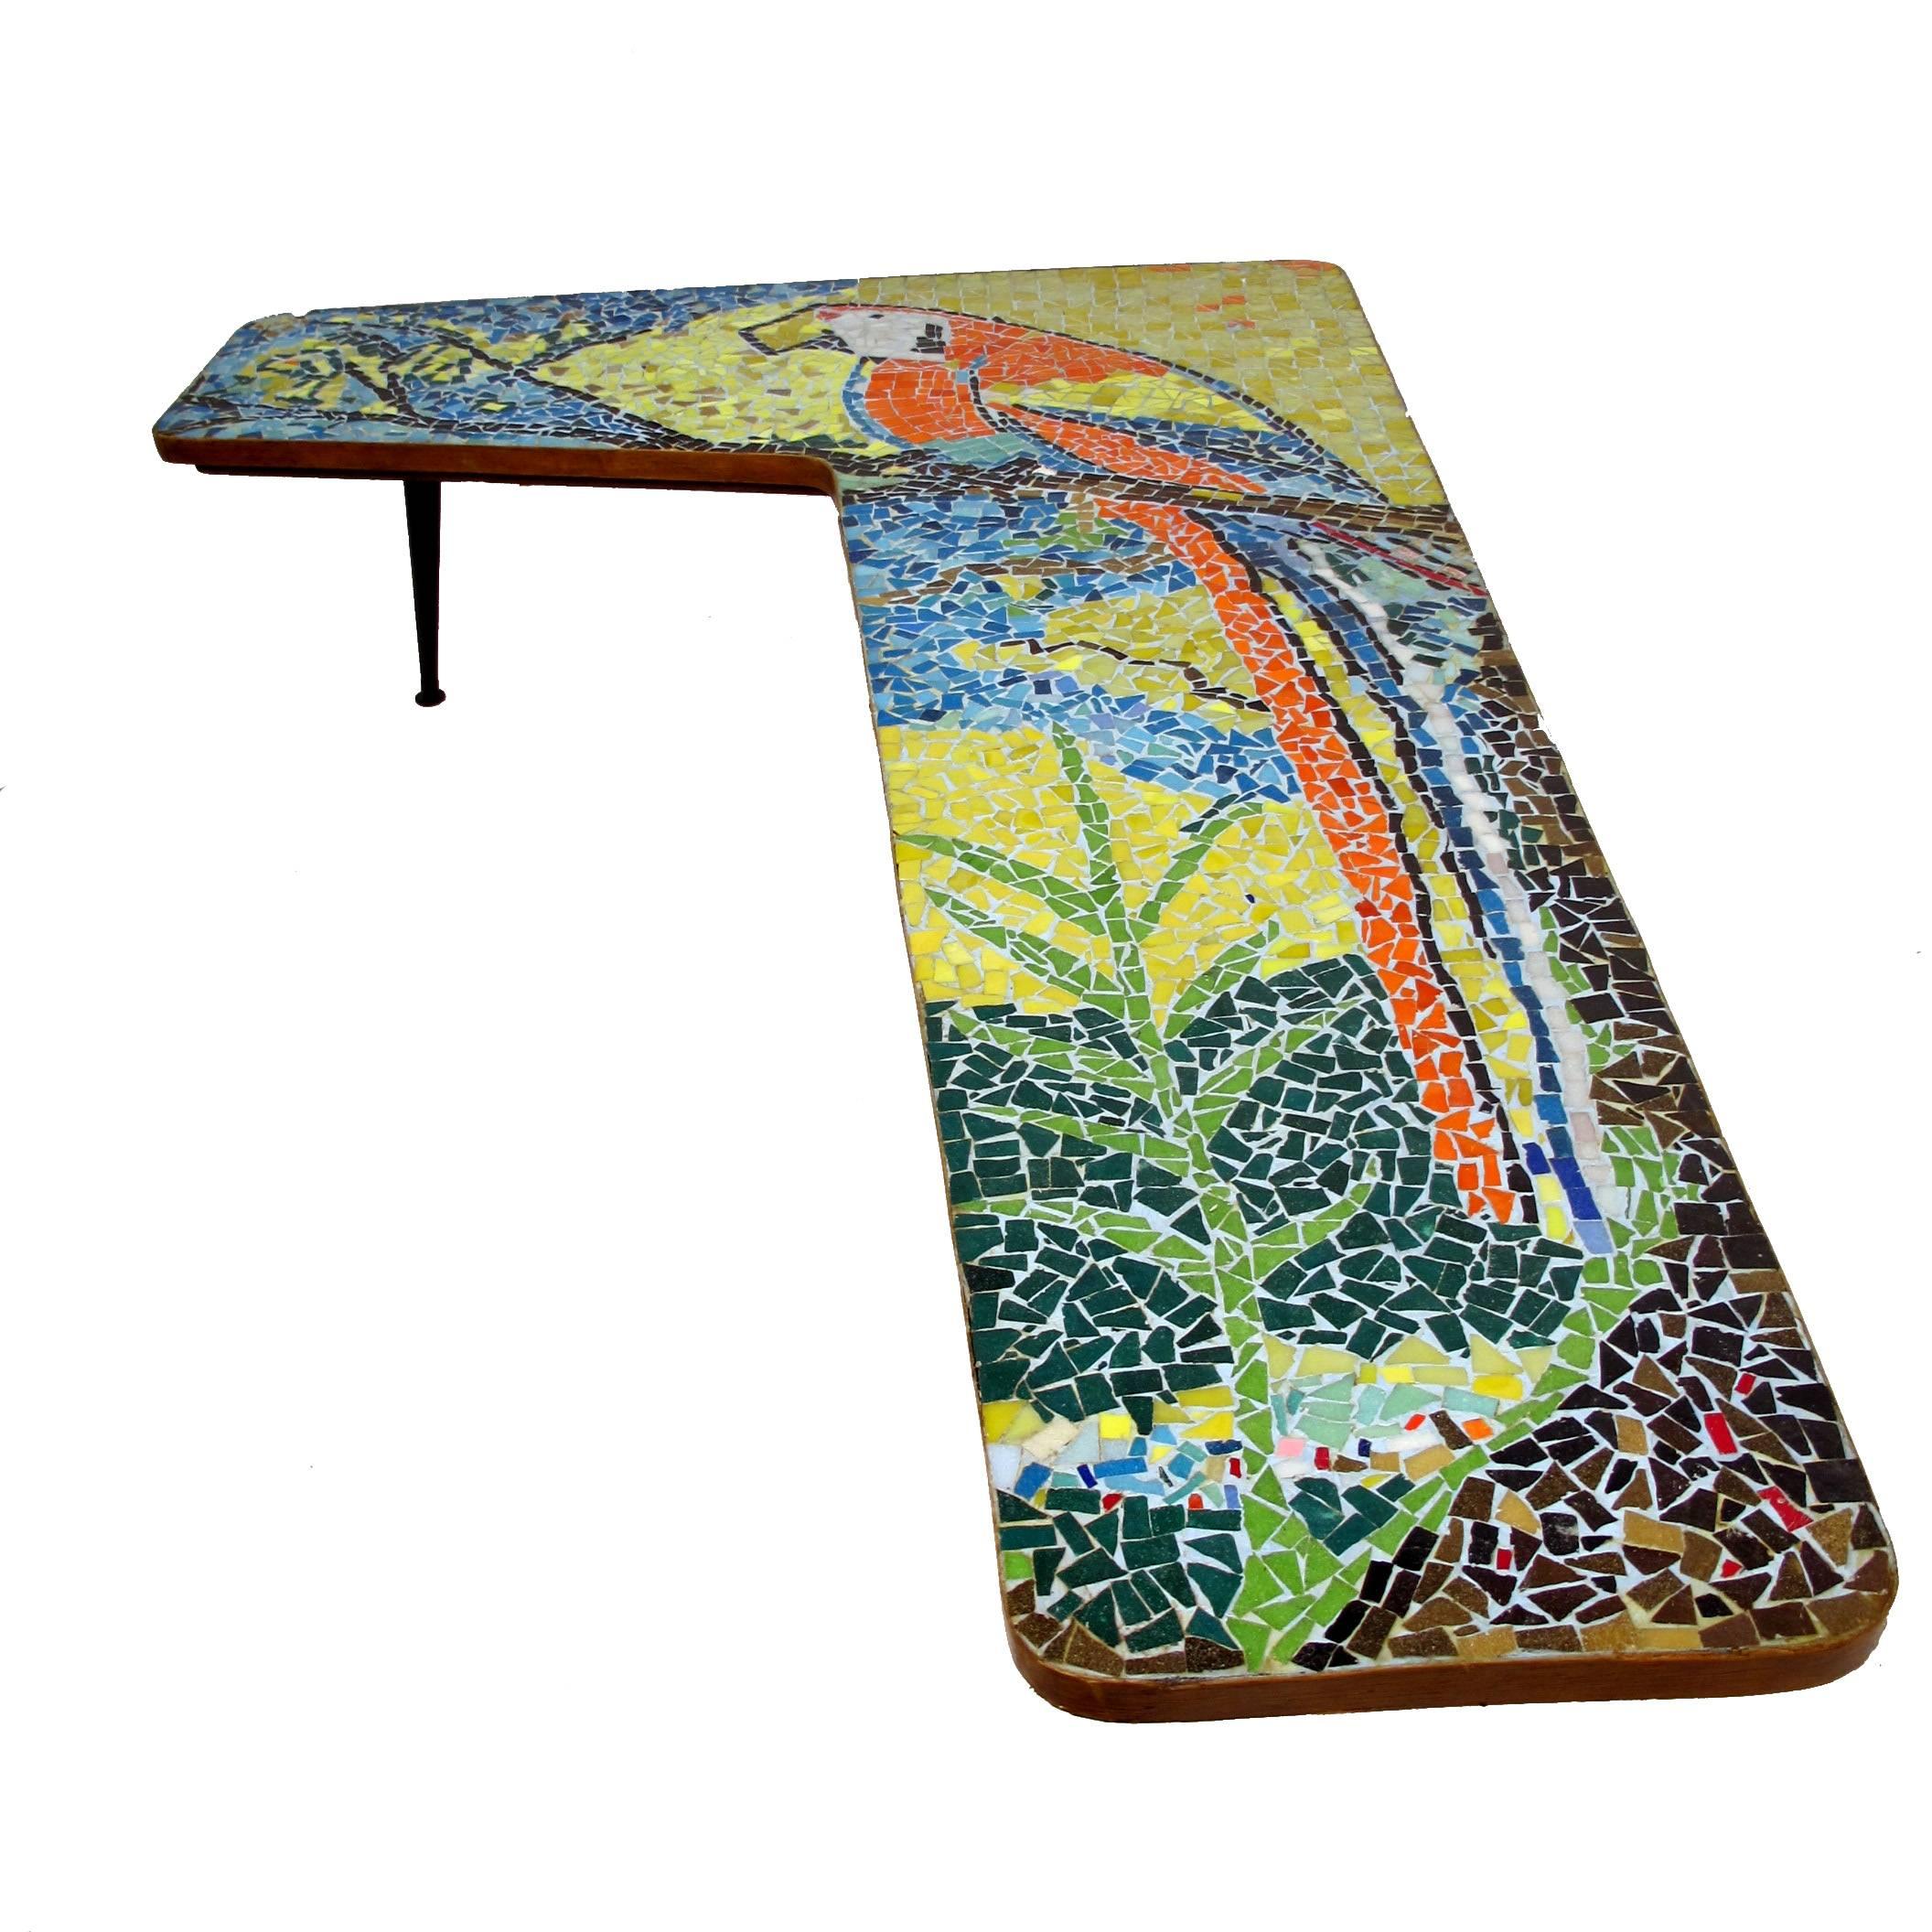 Handcrafted angular boomerang shape mosaic tile table with a large and colorful parrot. Tiles of ceramic and glass. American, mid-20th century.

